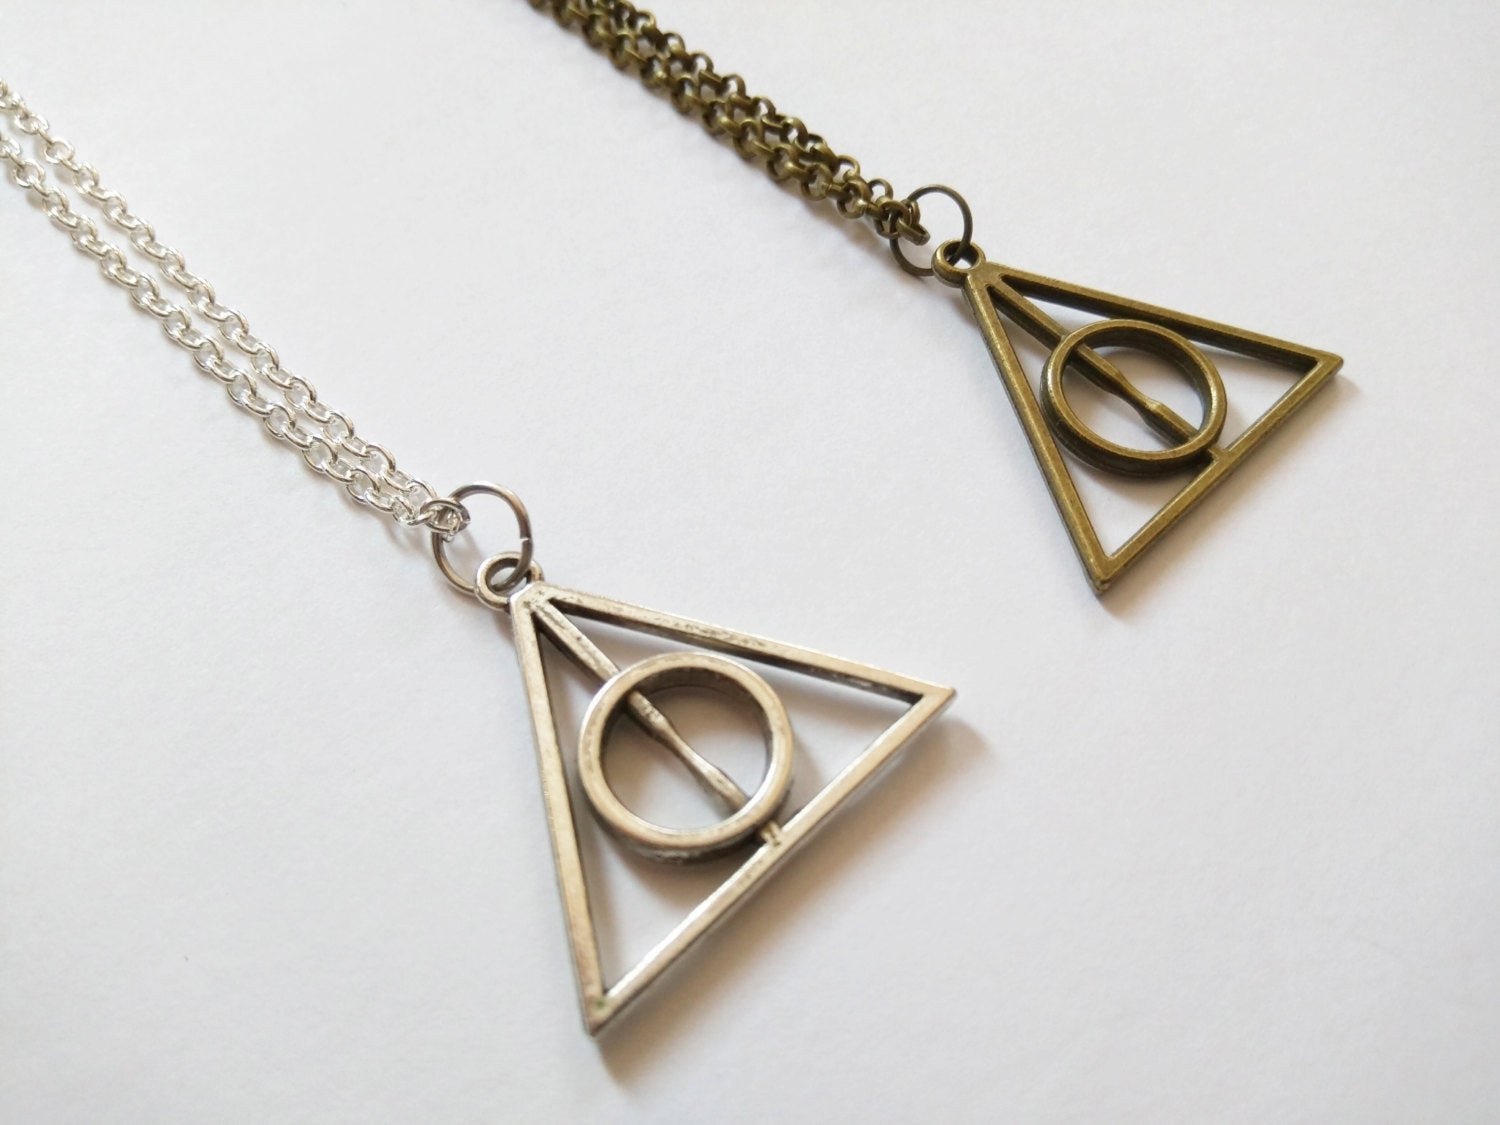 Harry Potter Necklaces
 Deathly Hallows Inspired Harry Potter Necklace